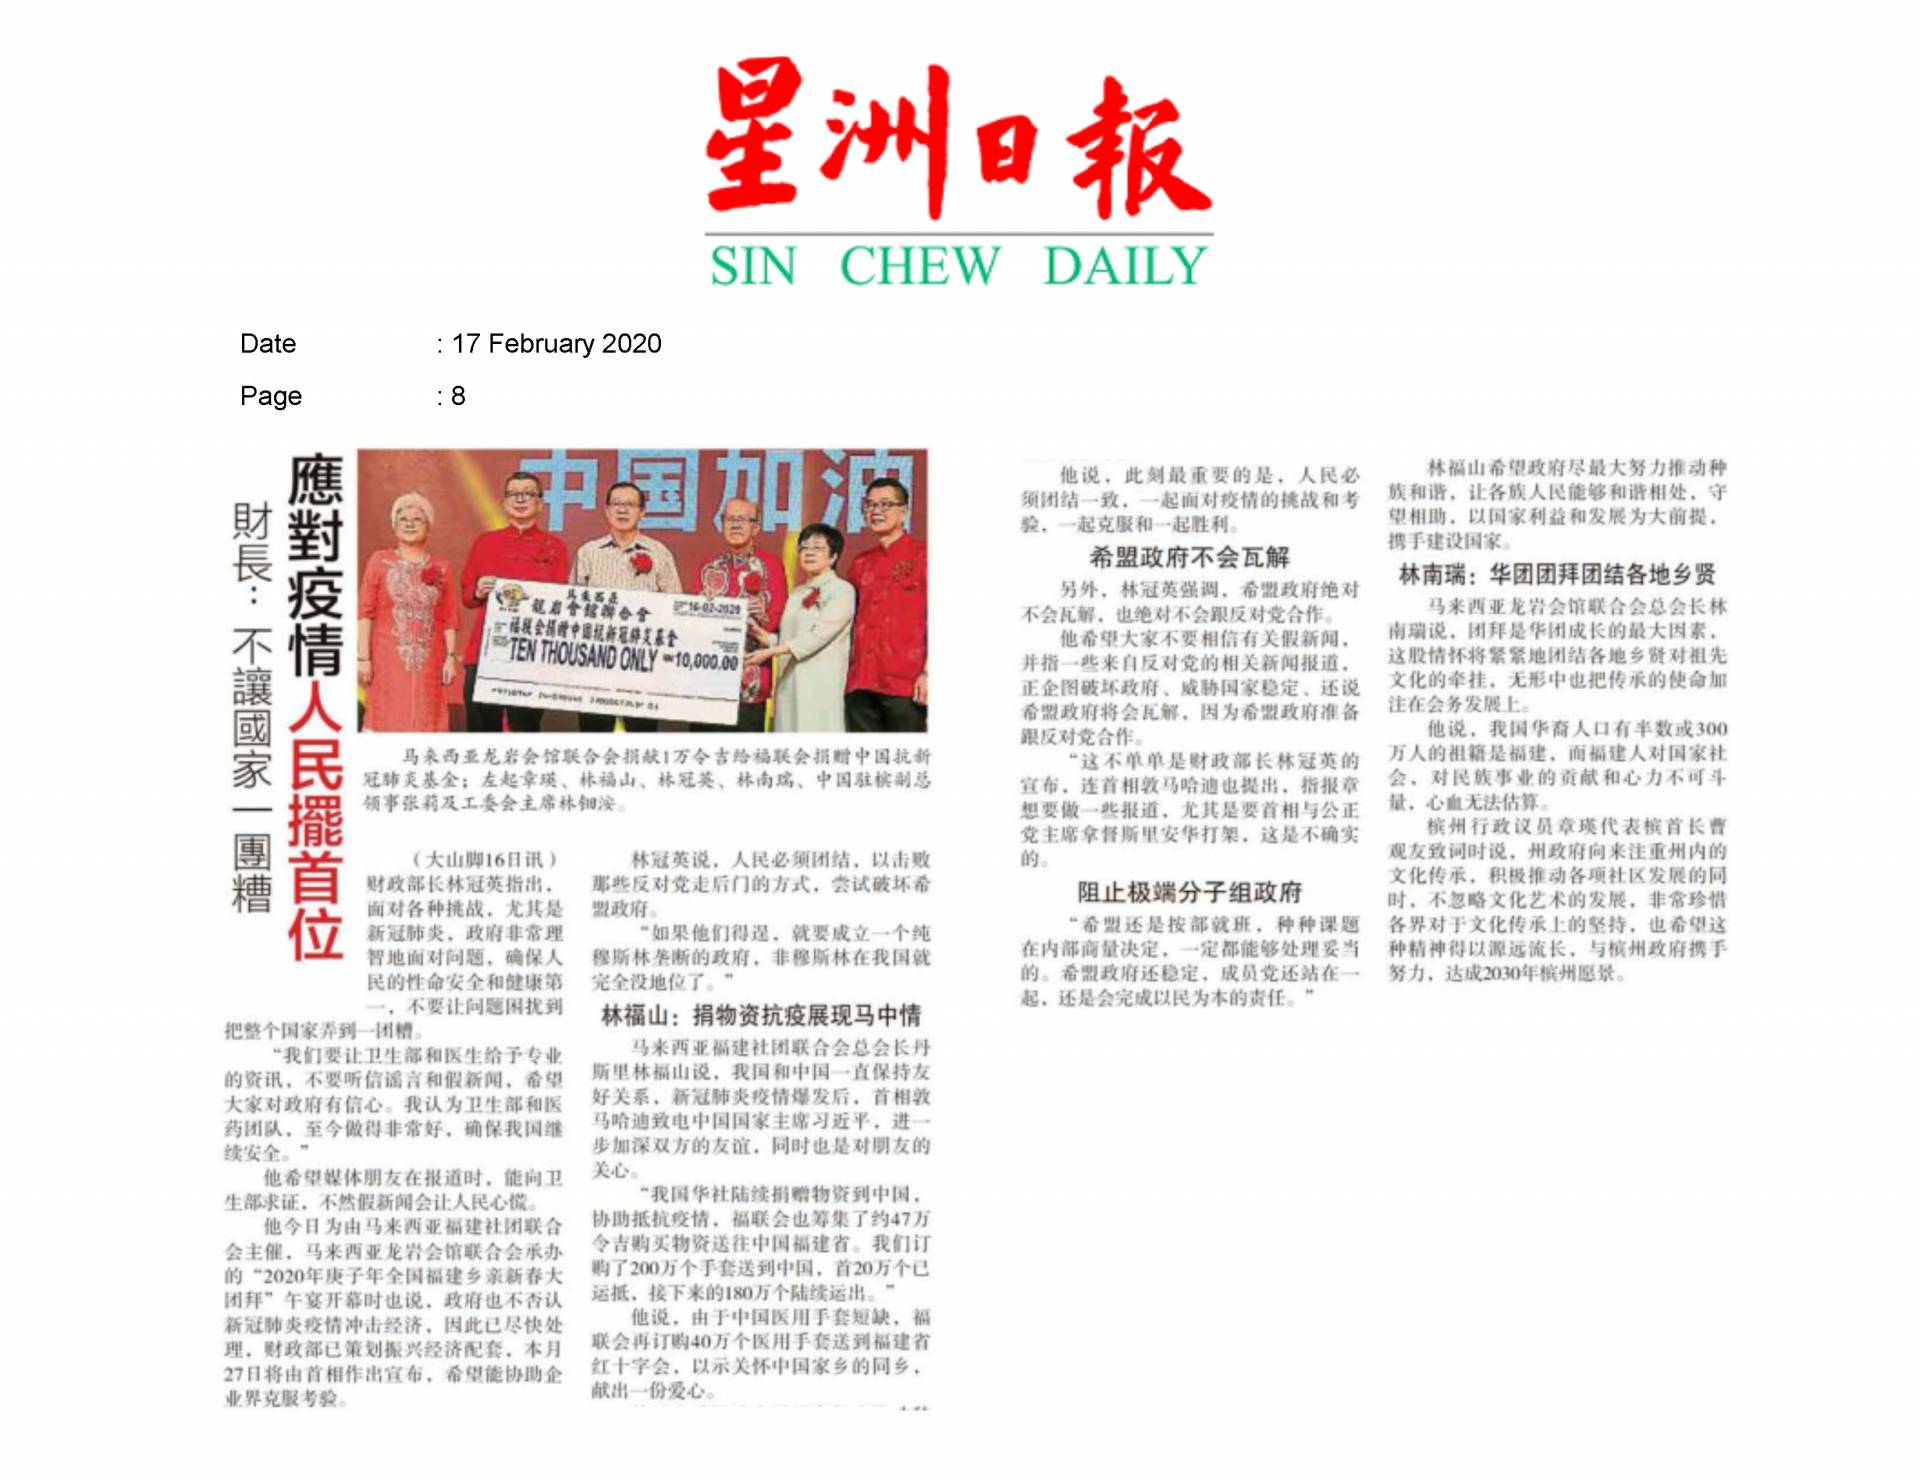 2020.02.17 Sin Chew - People first when comes to the fight against epidemic